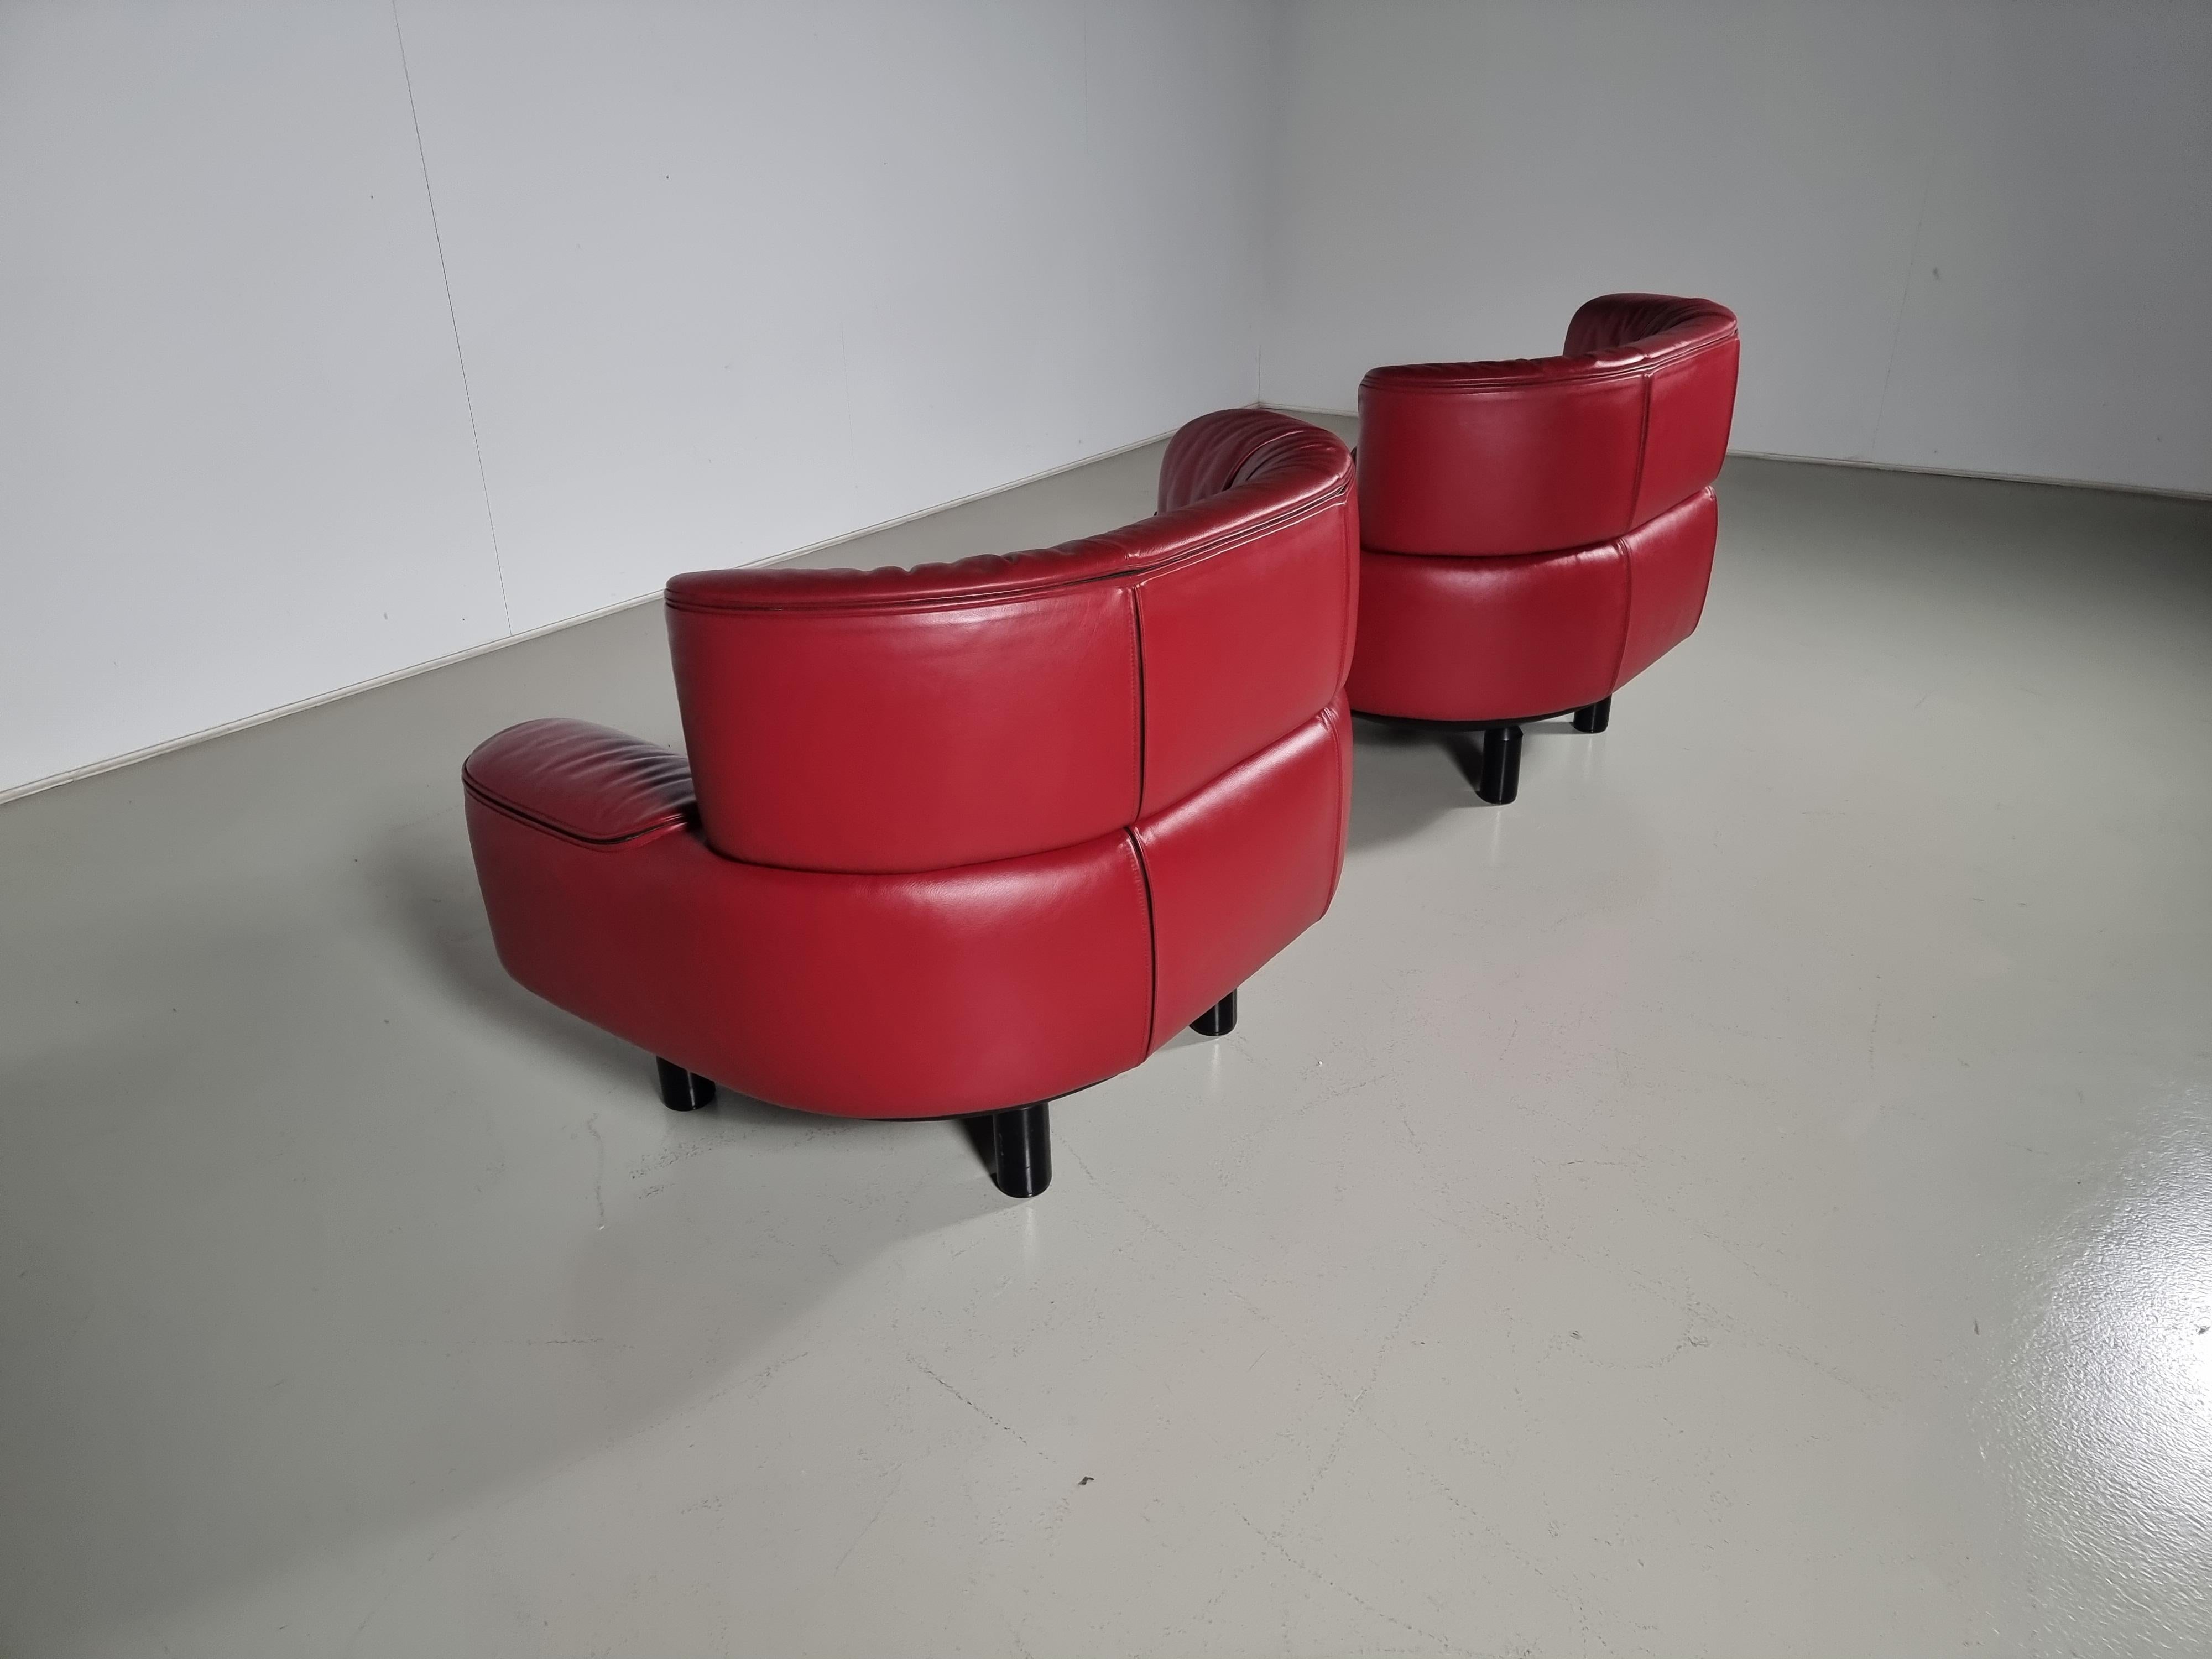 Spectacular and extremely rare set of lounge chairs set designed by Gianfranco Frattini and manufactured by Cassina, Italy 1987. This set is no longer in production and was only produced for 1 year. They are documented in the famous Italian